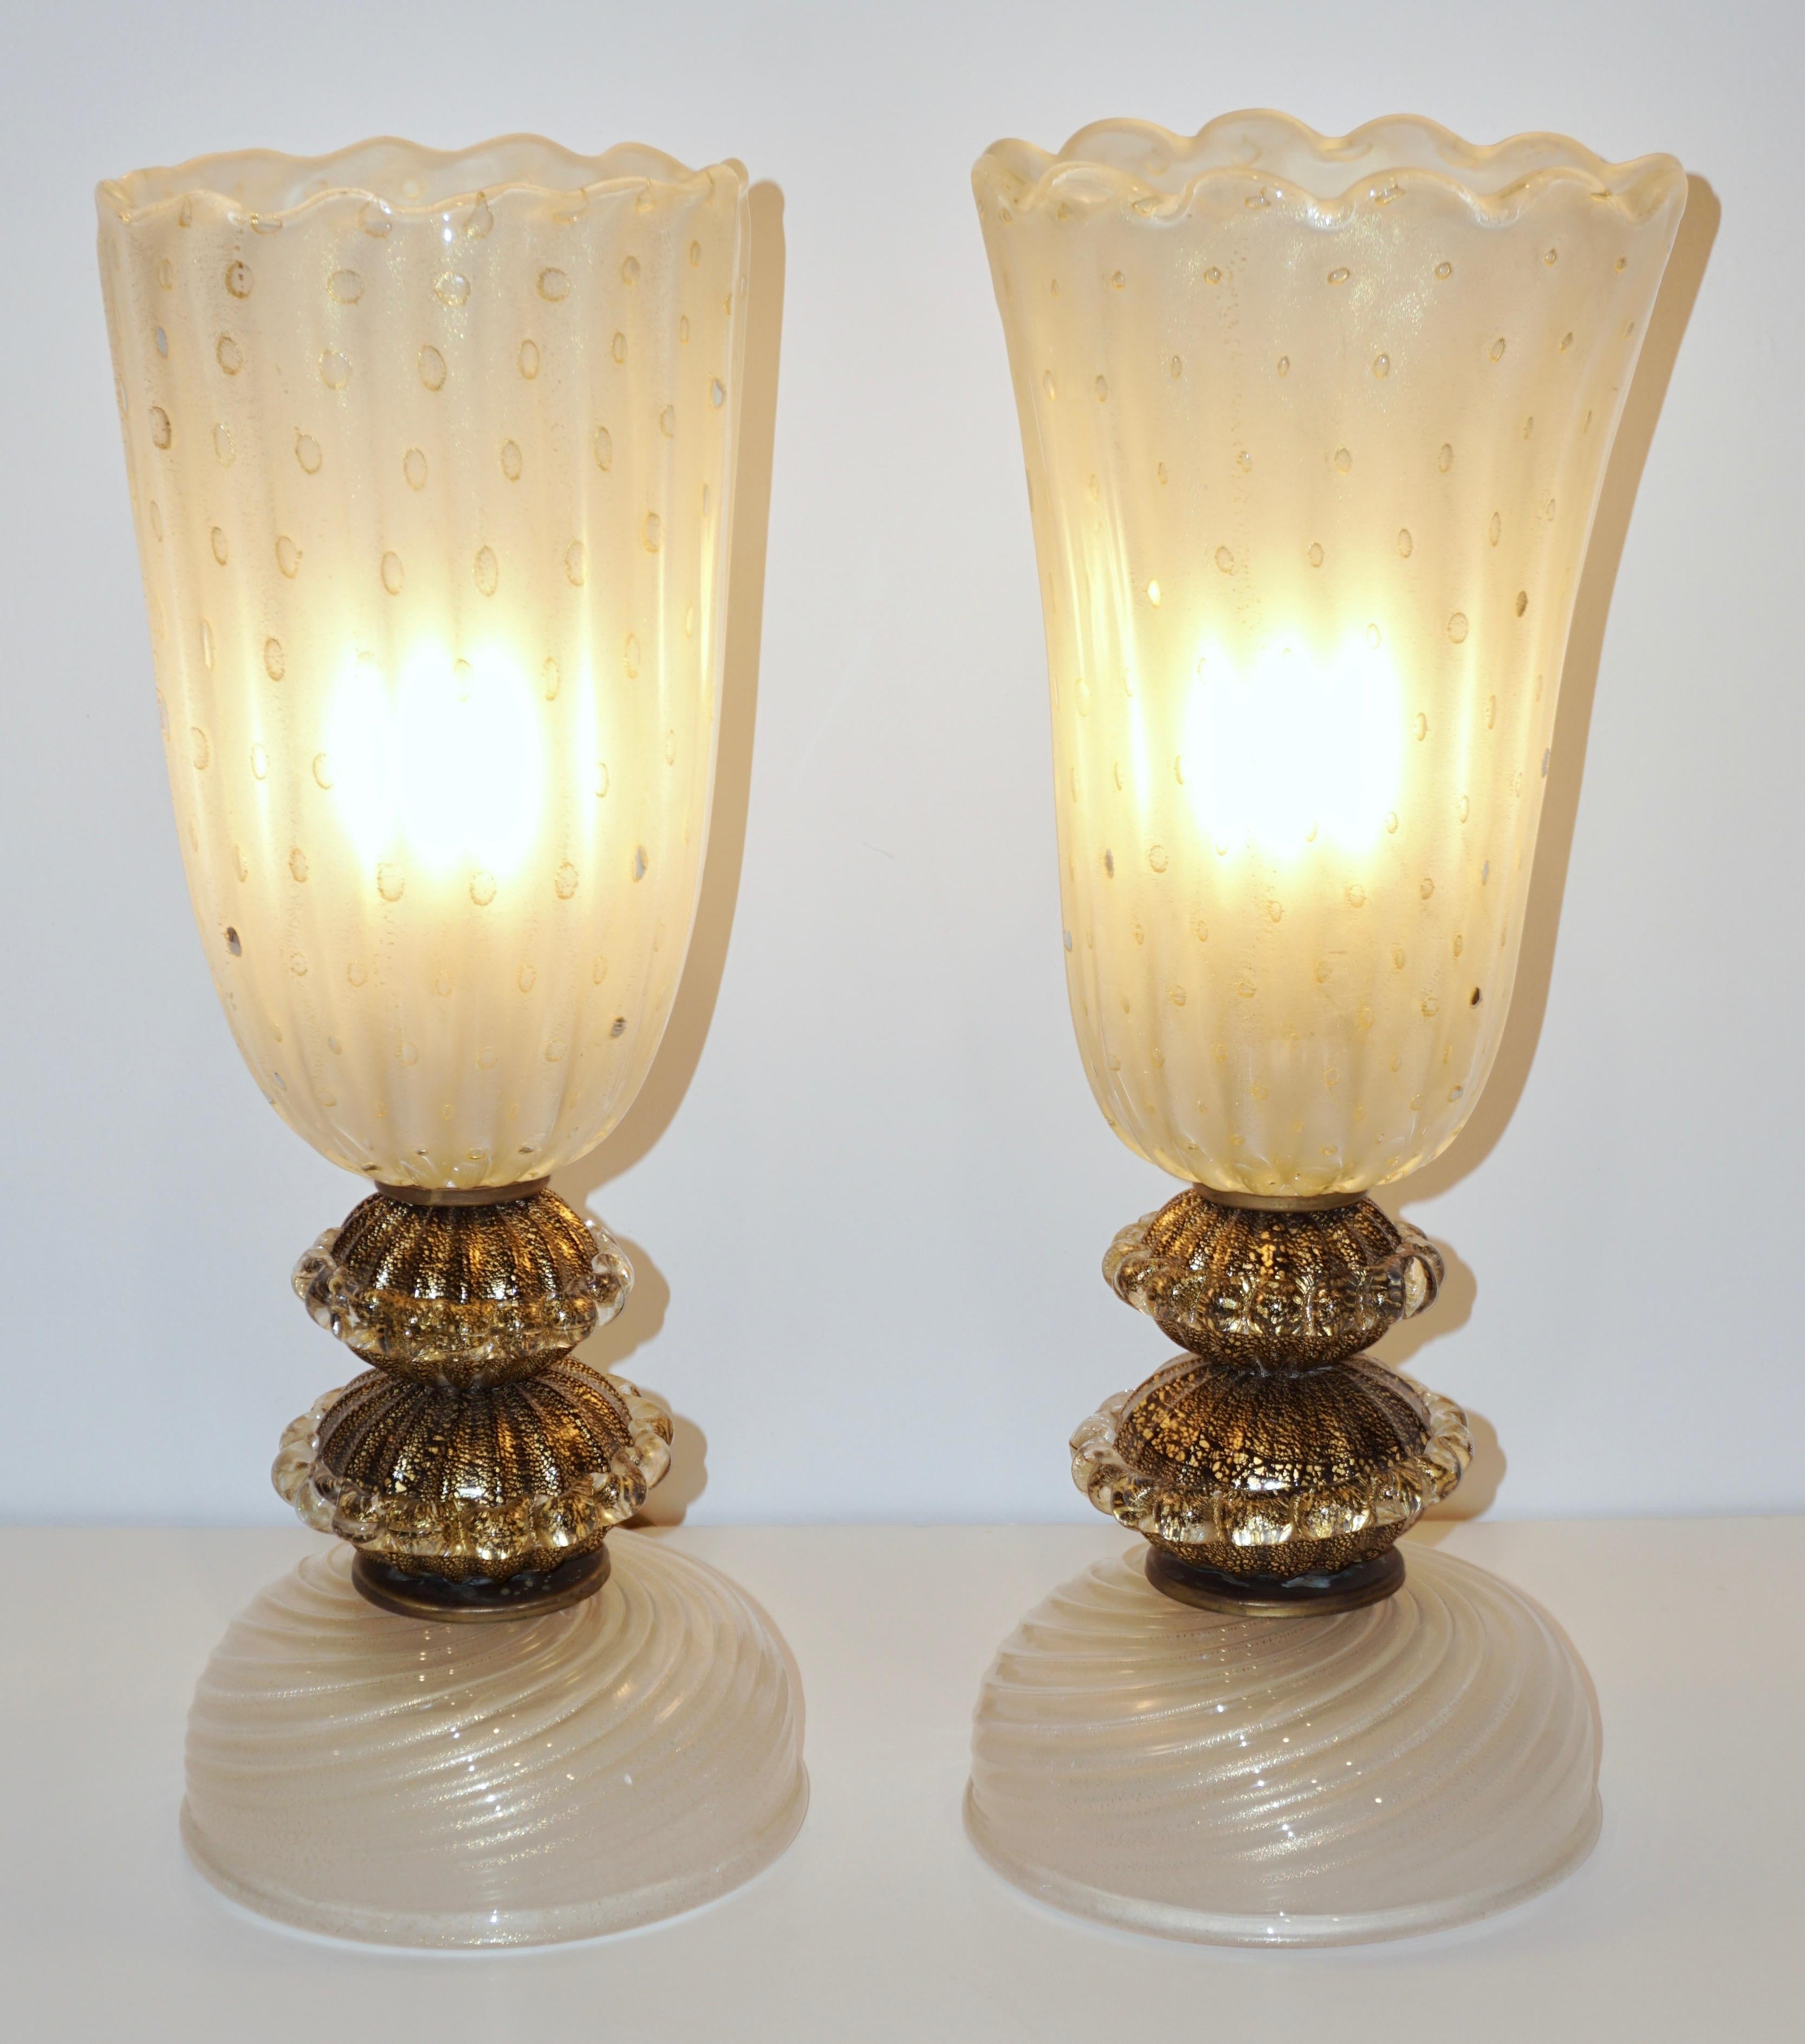 An elegant mid-20th century pair of Venetian table lamps, of organic modern design, blown with maestria by Barovier & Toso: the sophisticated flared ribbed bodies with a scalloped edge in overlaid crystal clear Murano glass are frosted on the inside